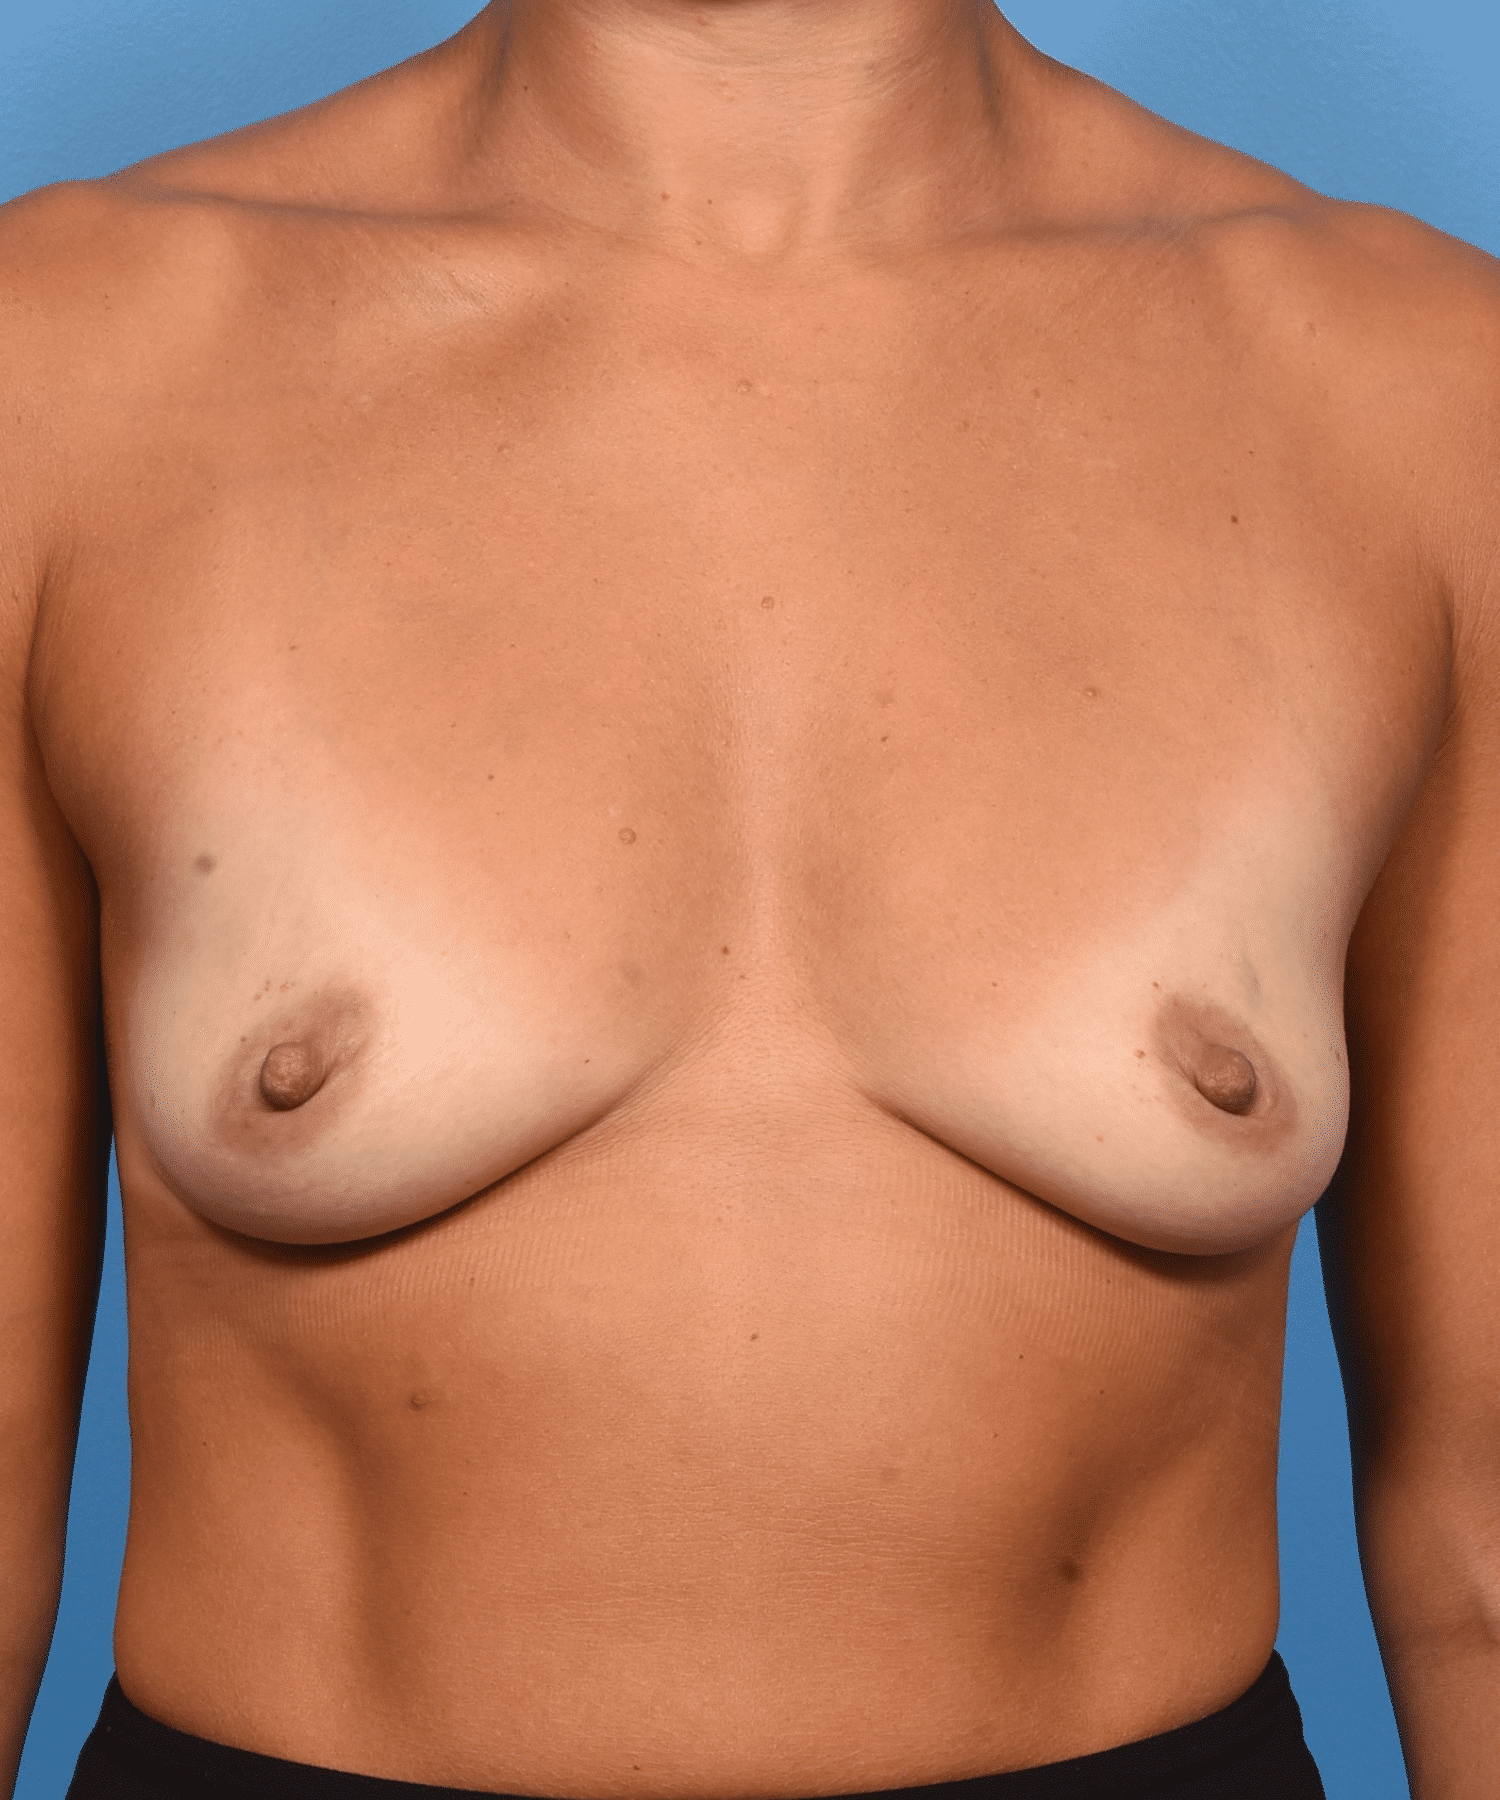 Breast Enhancement With Silicone Round “Gummy” Implants